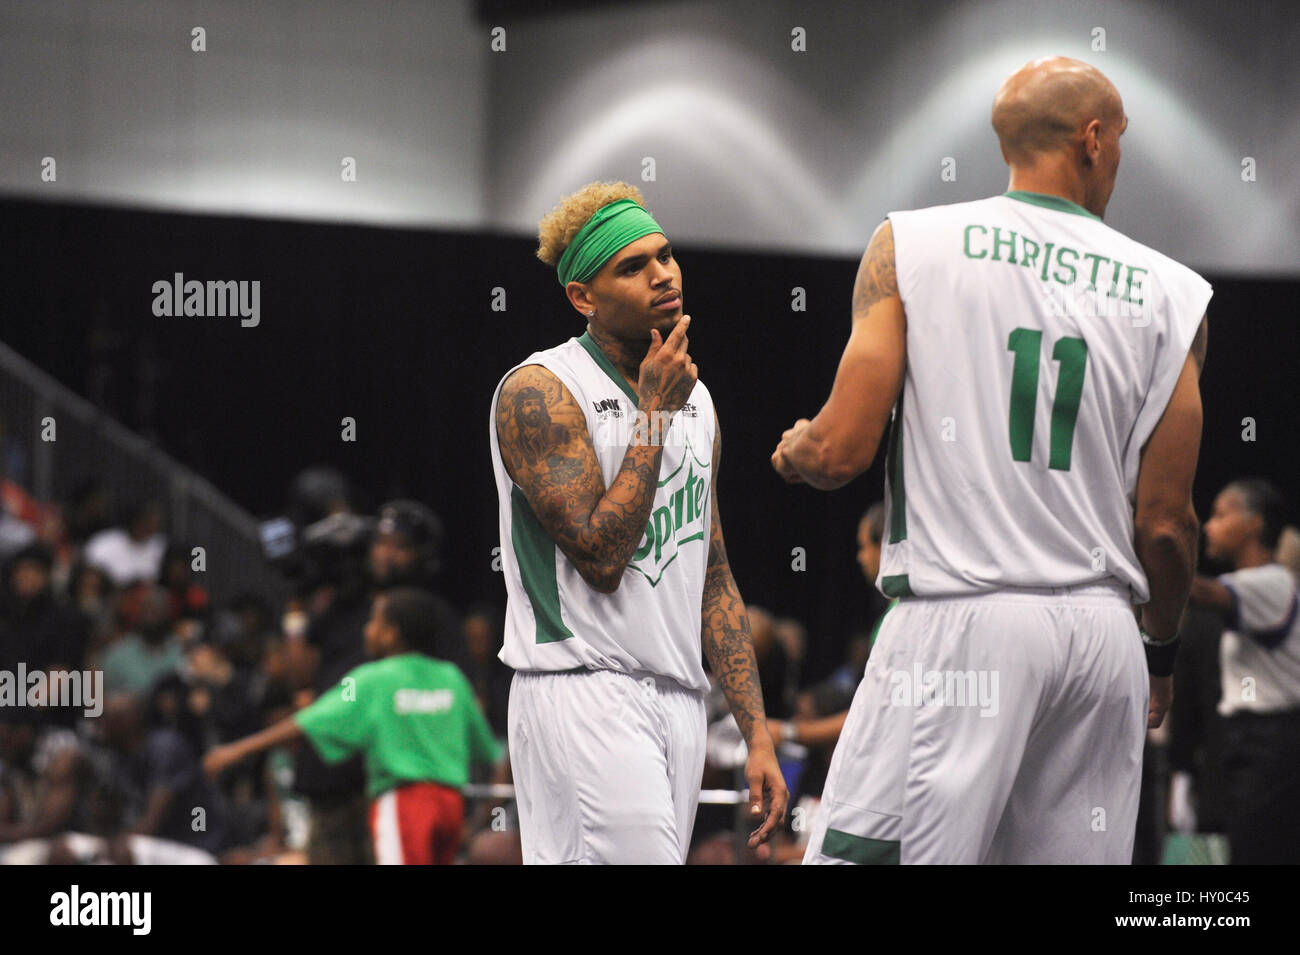 attends the BET Experience Sprite Celebrity Basketball Game at the Los Angeles Convention Center on June 27th, 2015 in Los Angeles, California. Stock Photo